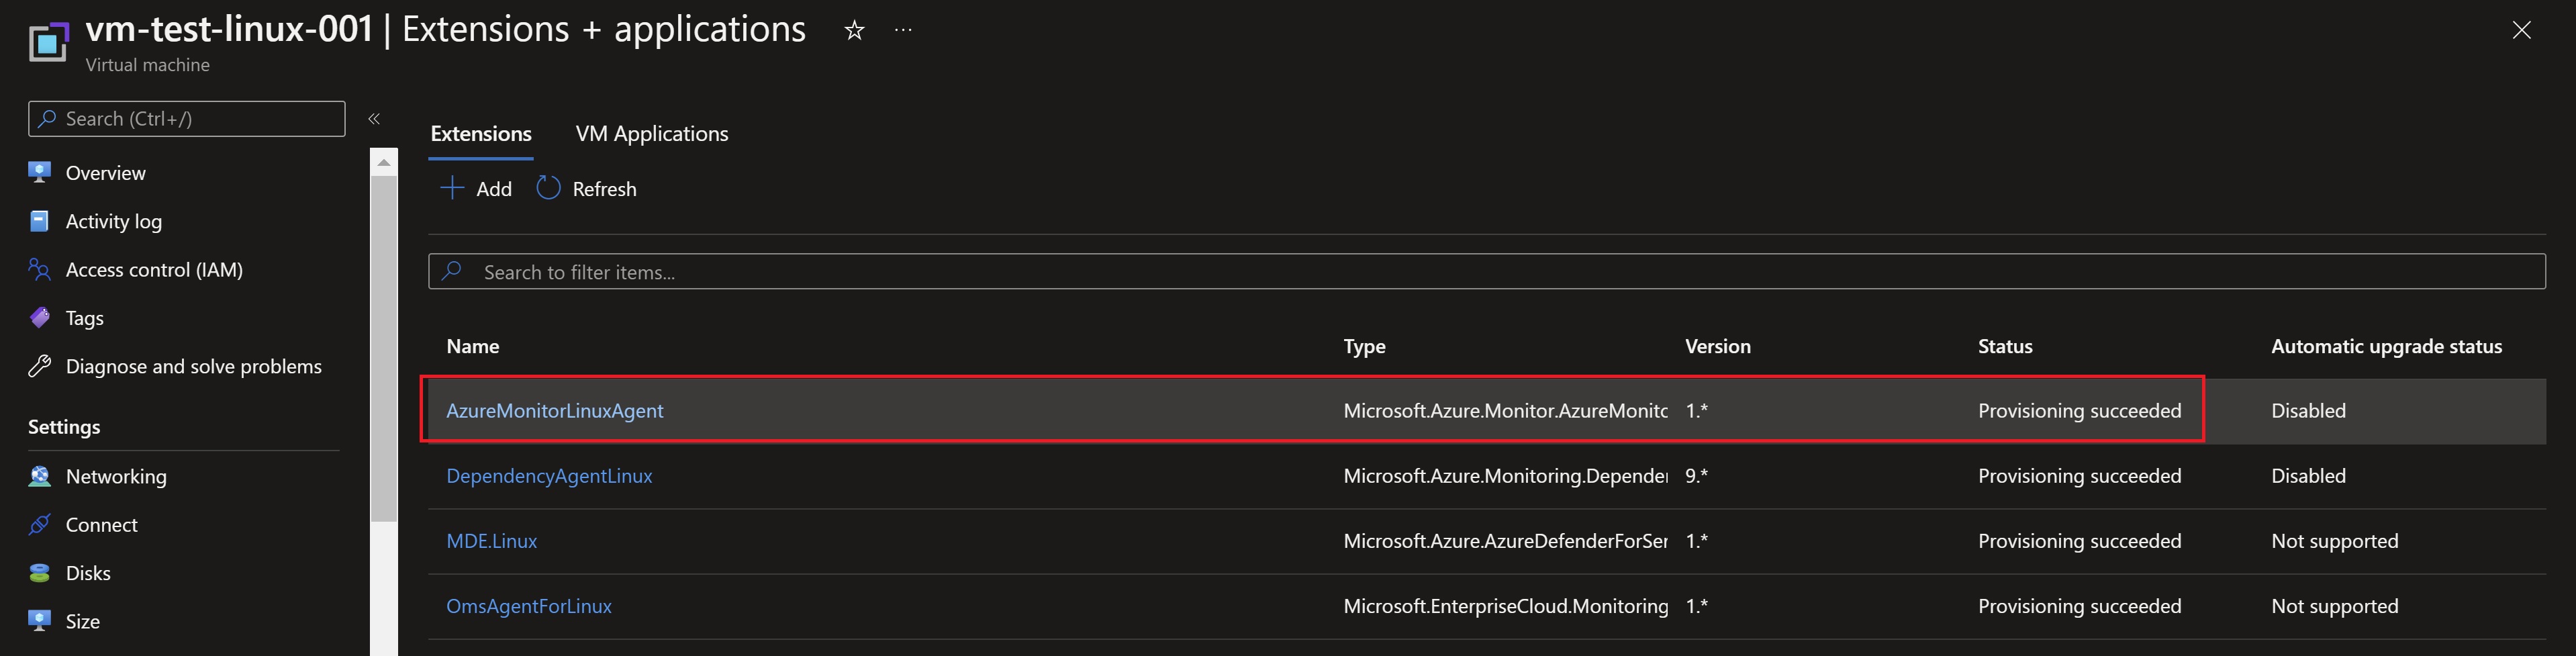 Screenshot showing the AMA extension on the azure VM 